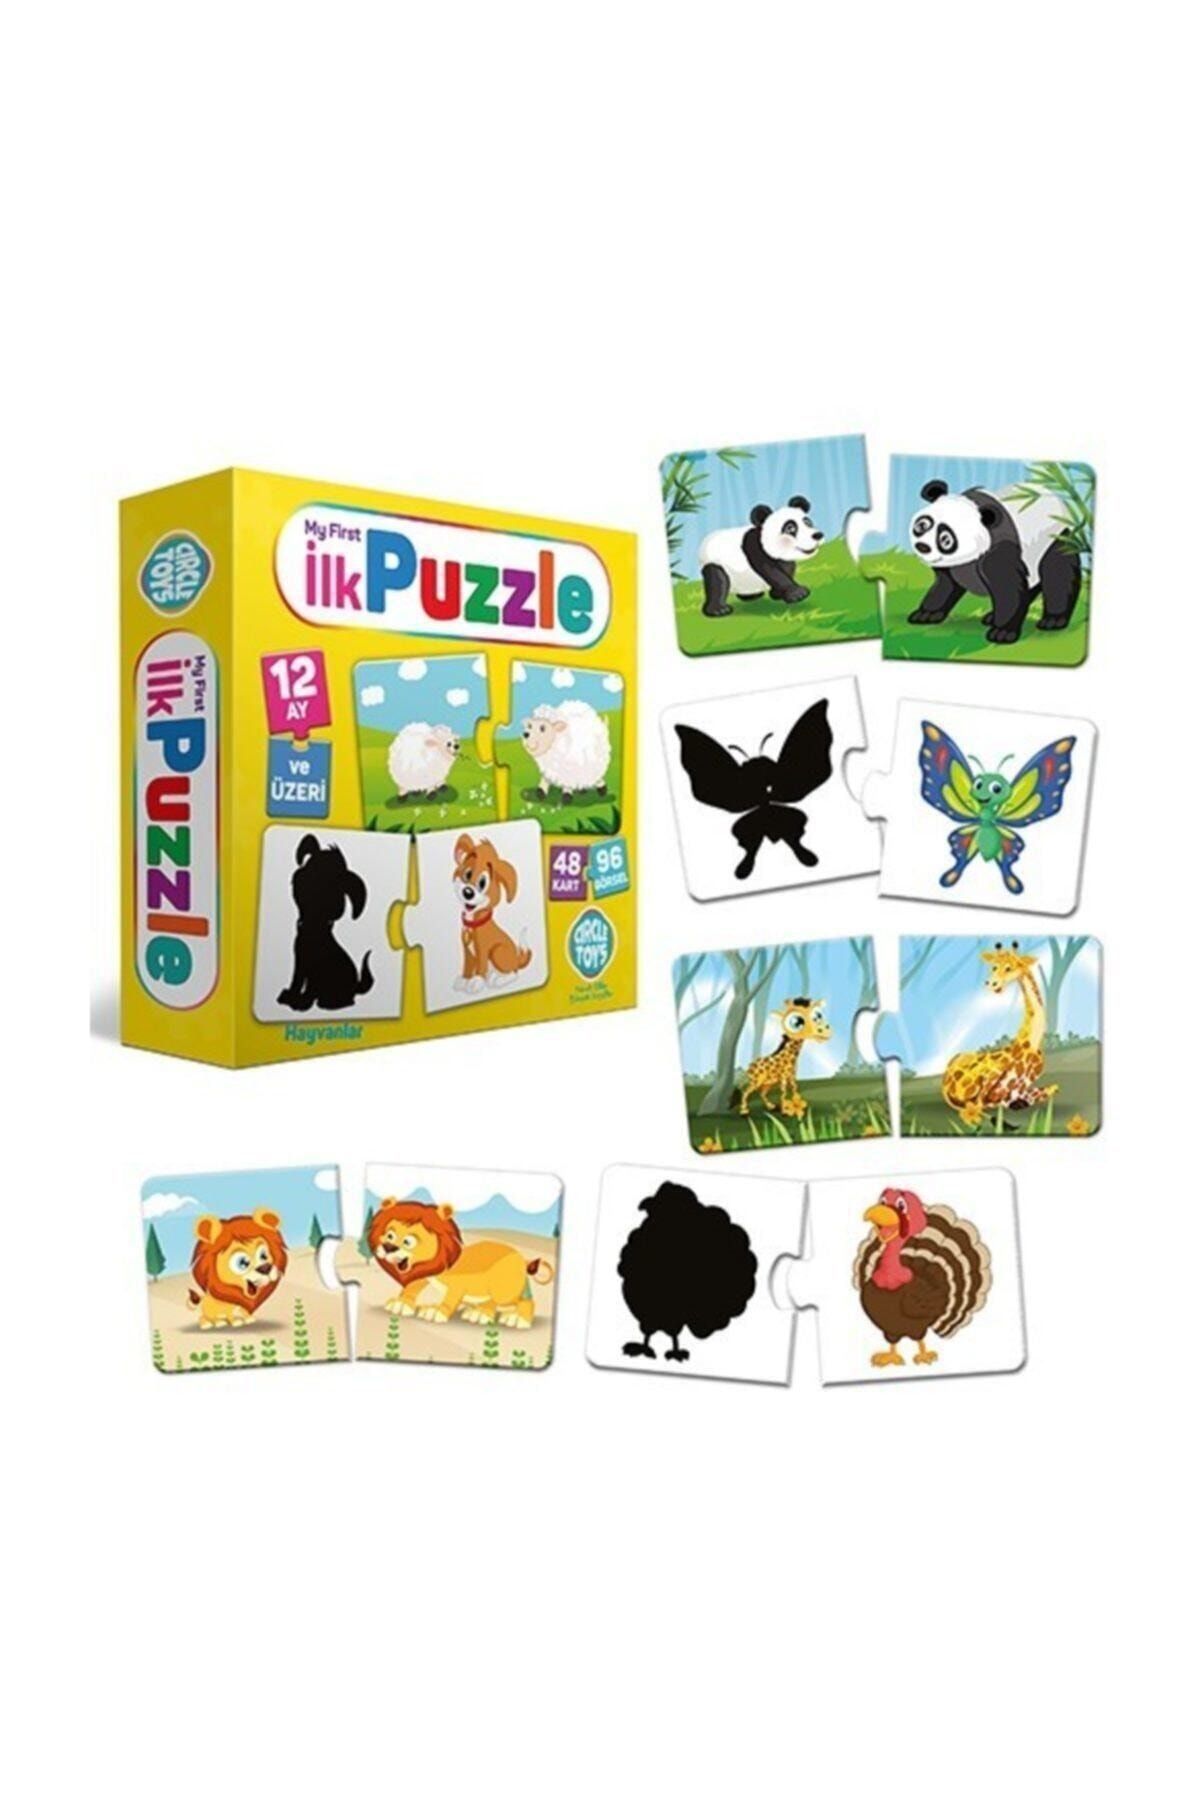 Circle Toys Ilk Puzzle Myfirst Puzzle